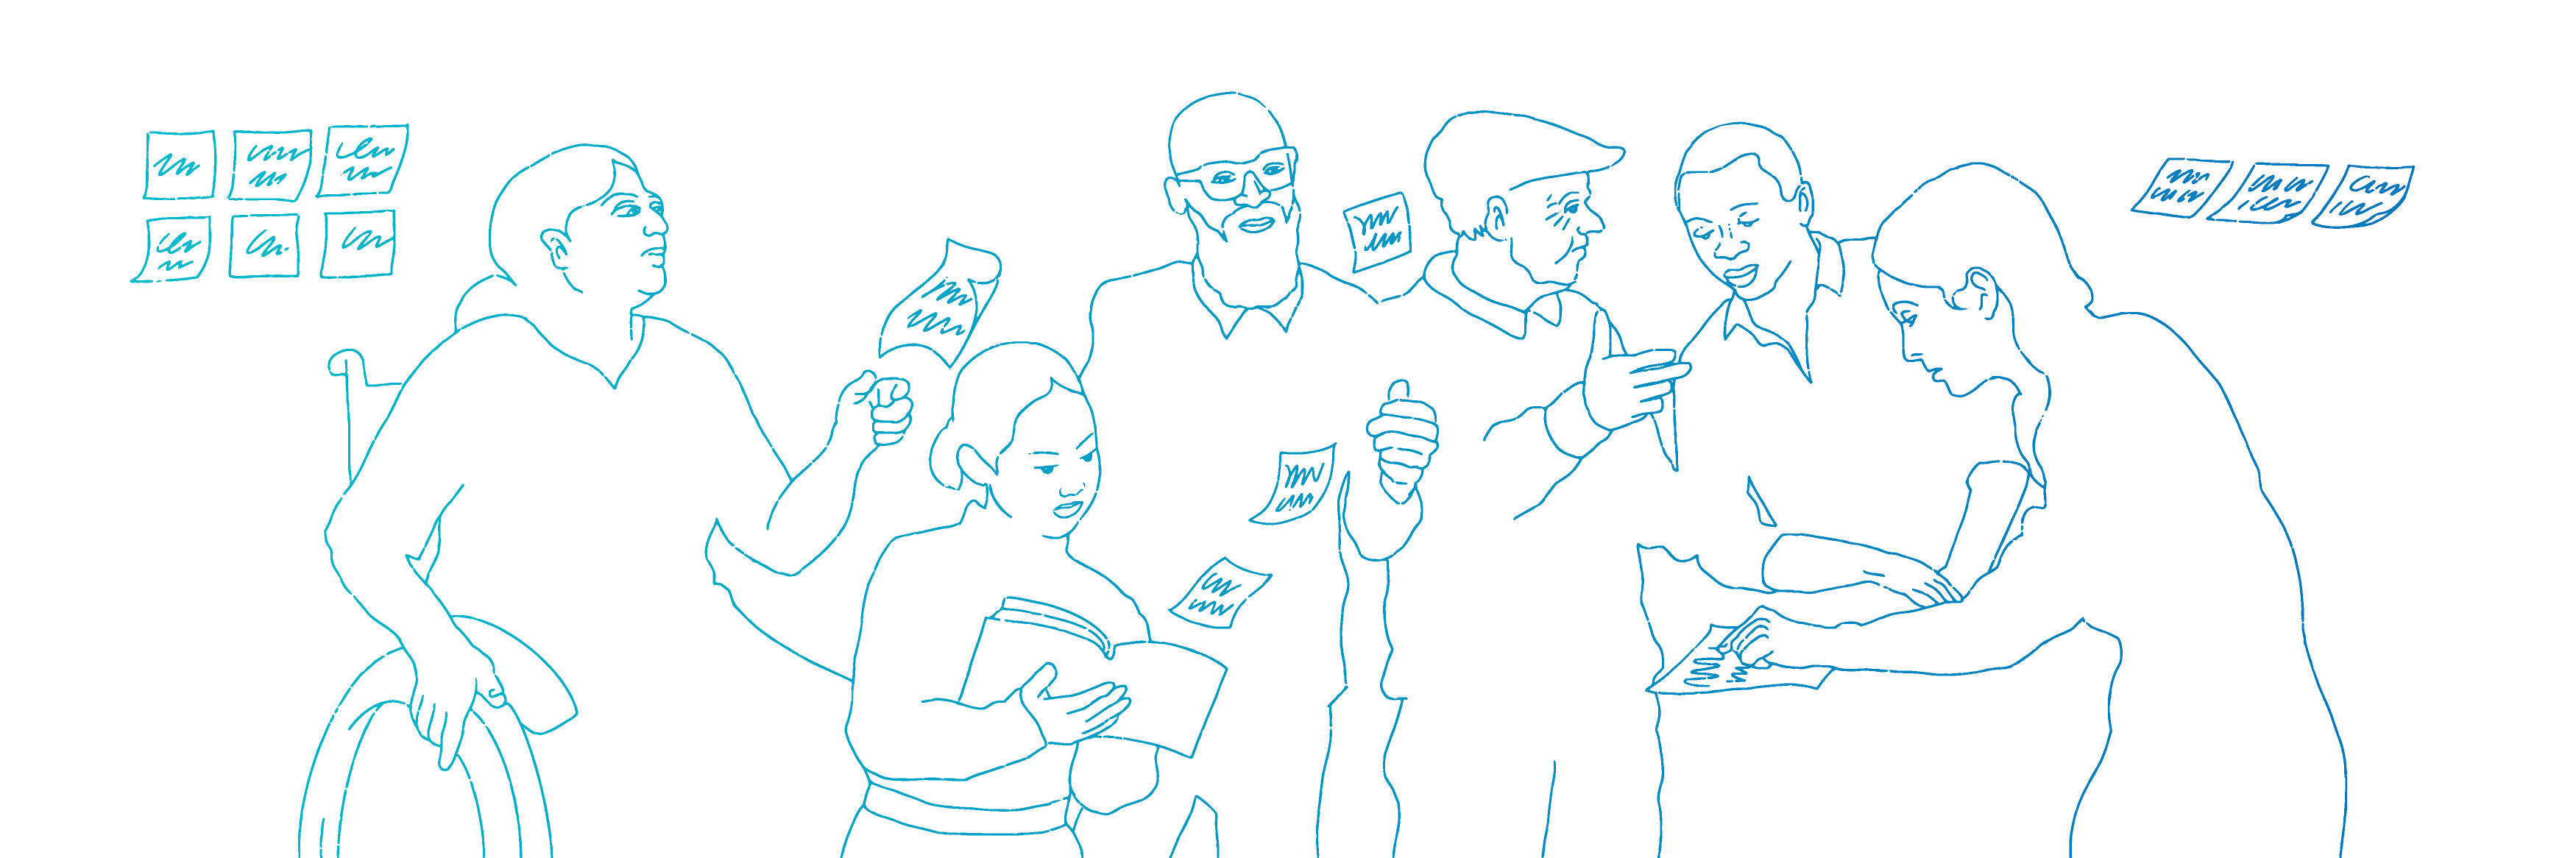 Illustration showing those who don't have access to digital systems trying to get healthcare services in person 